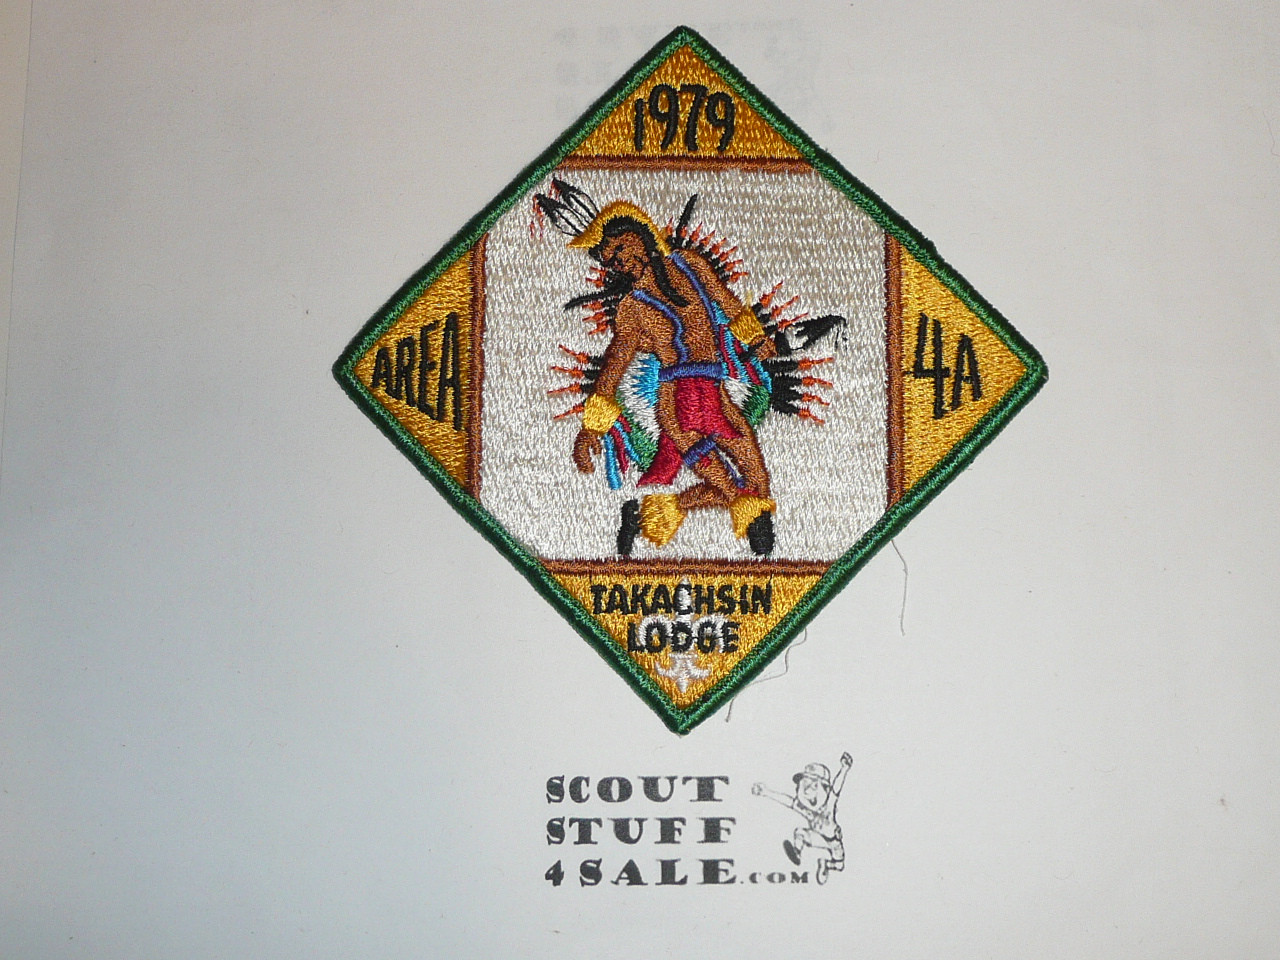 Section EC 4A 1979 O.A. Conference Patch - Scout